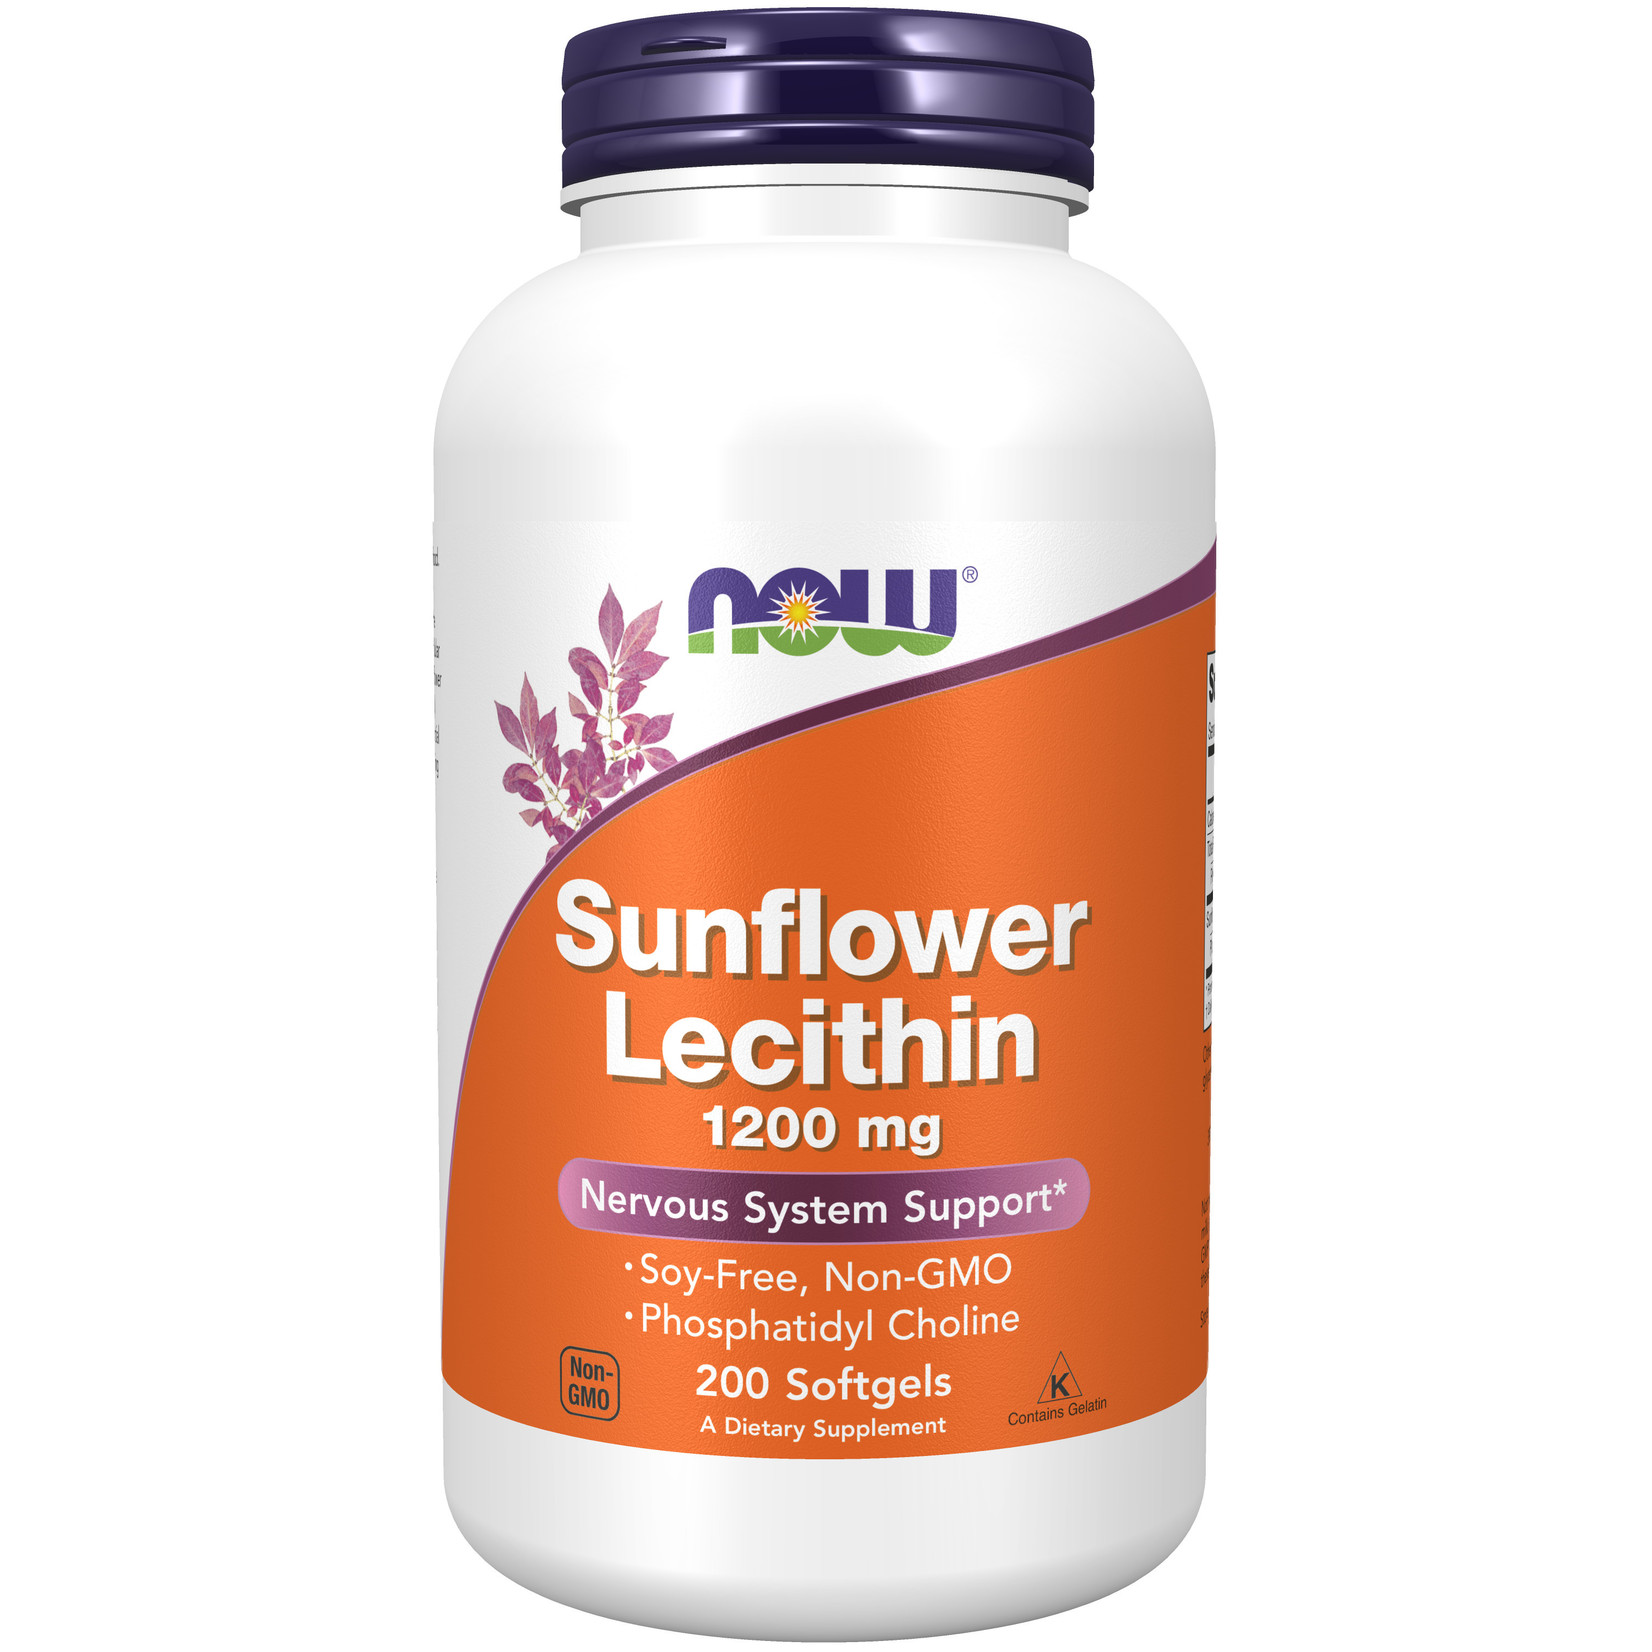 Now Now - Sunflower Lecithin 1200 mg Soy-Free, Non-GMO - 200 Softgels